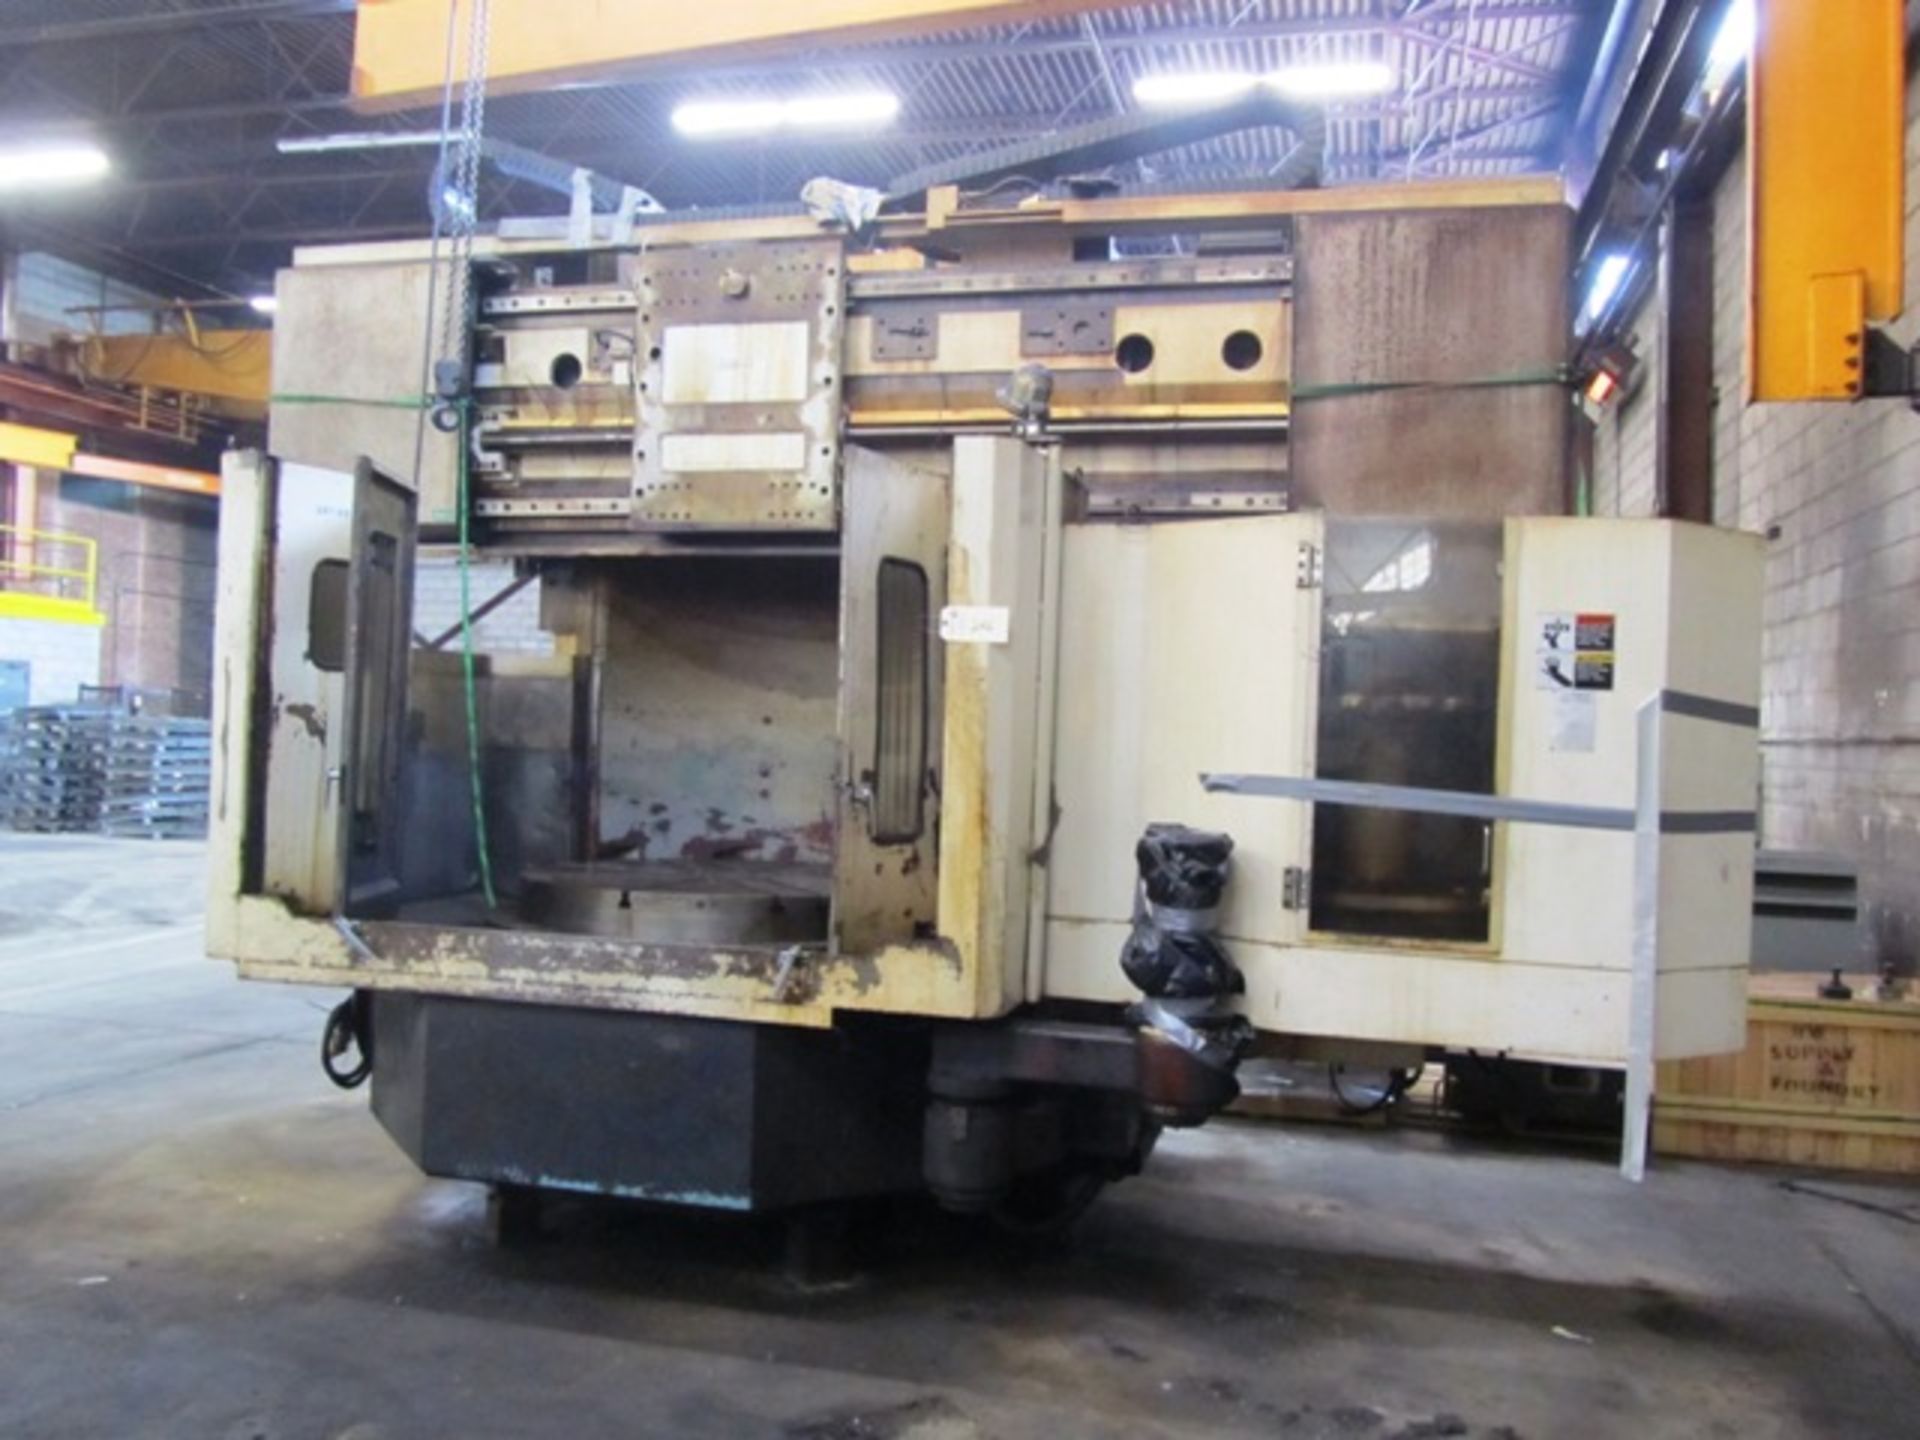 Toshiba TMD-13 CNC Vertical Boring Mill with 24-ATC, 49.18'' Table, 4-Jaw Chuck, 62.99'' Swing, 43.